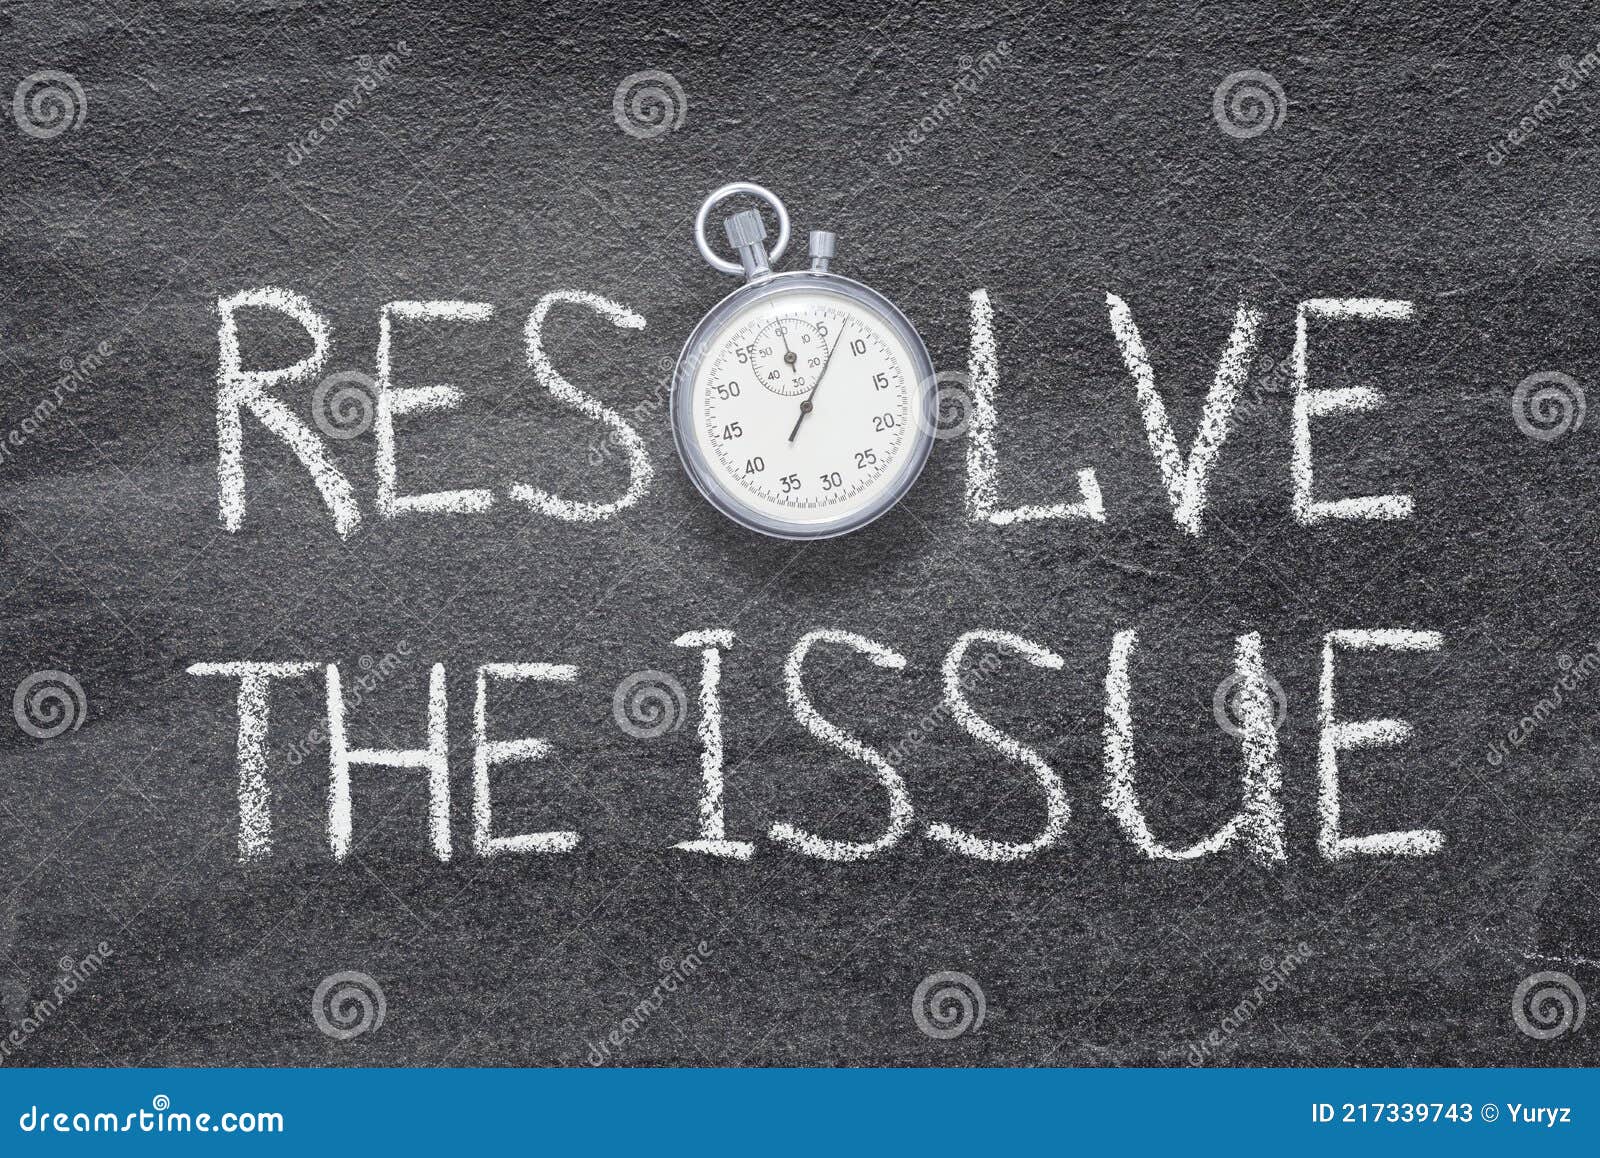 resolve the issue watch